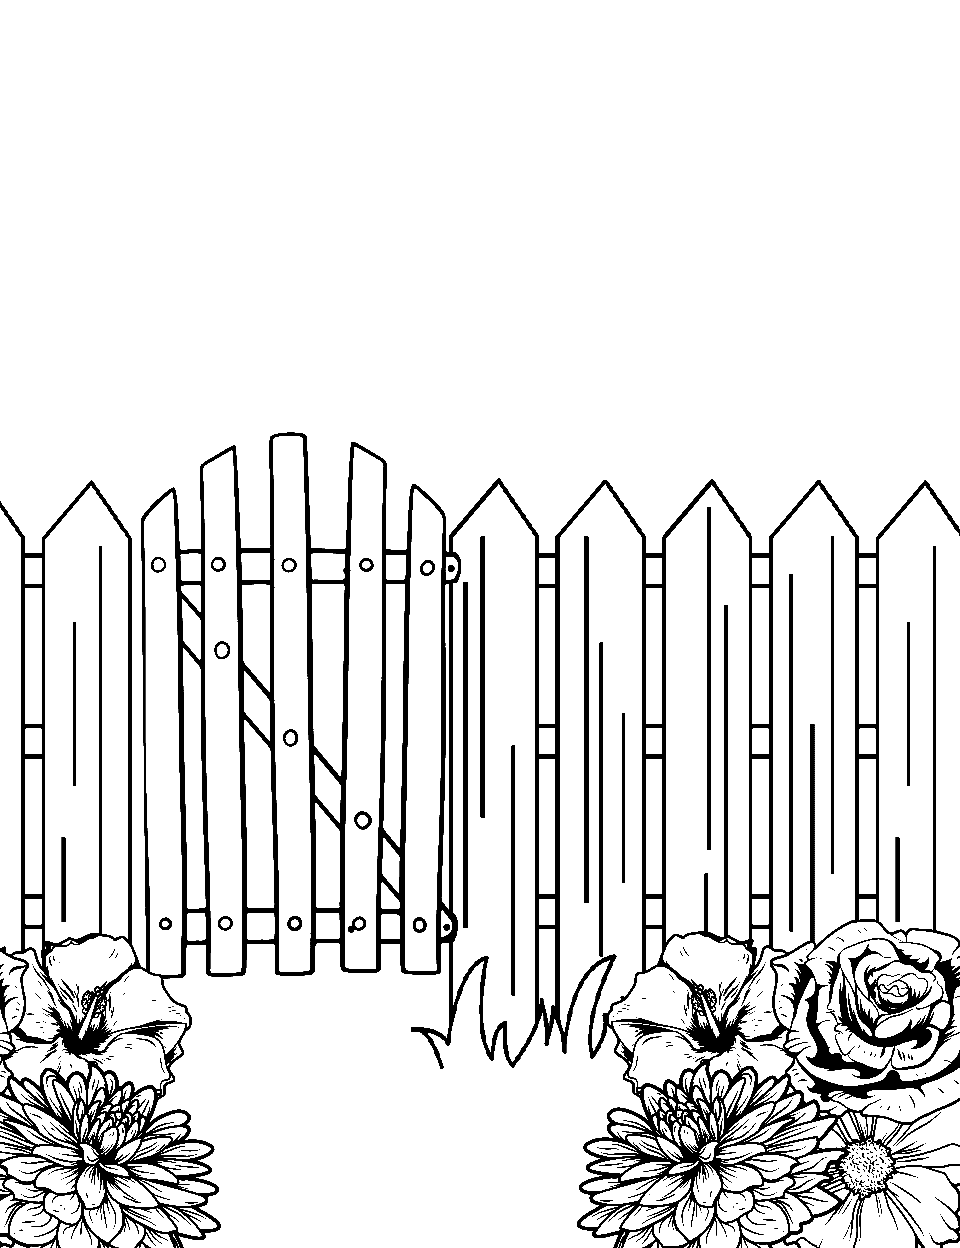 Garden Gate Coloring Page - A garden with a picket fence and a gate.